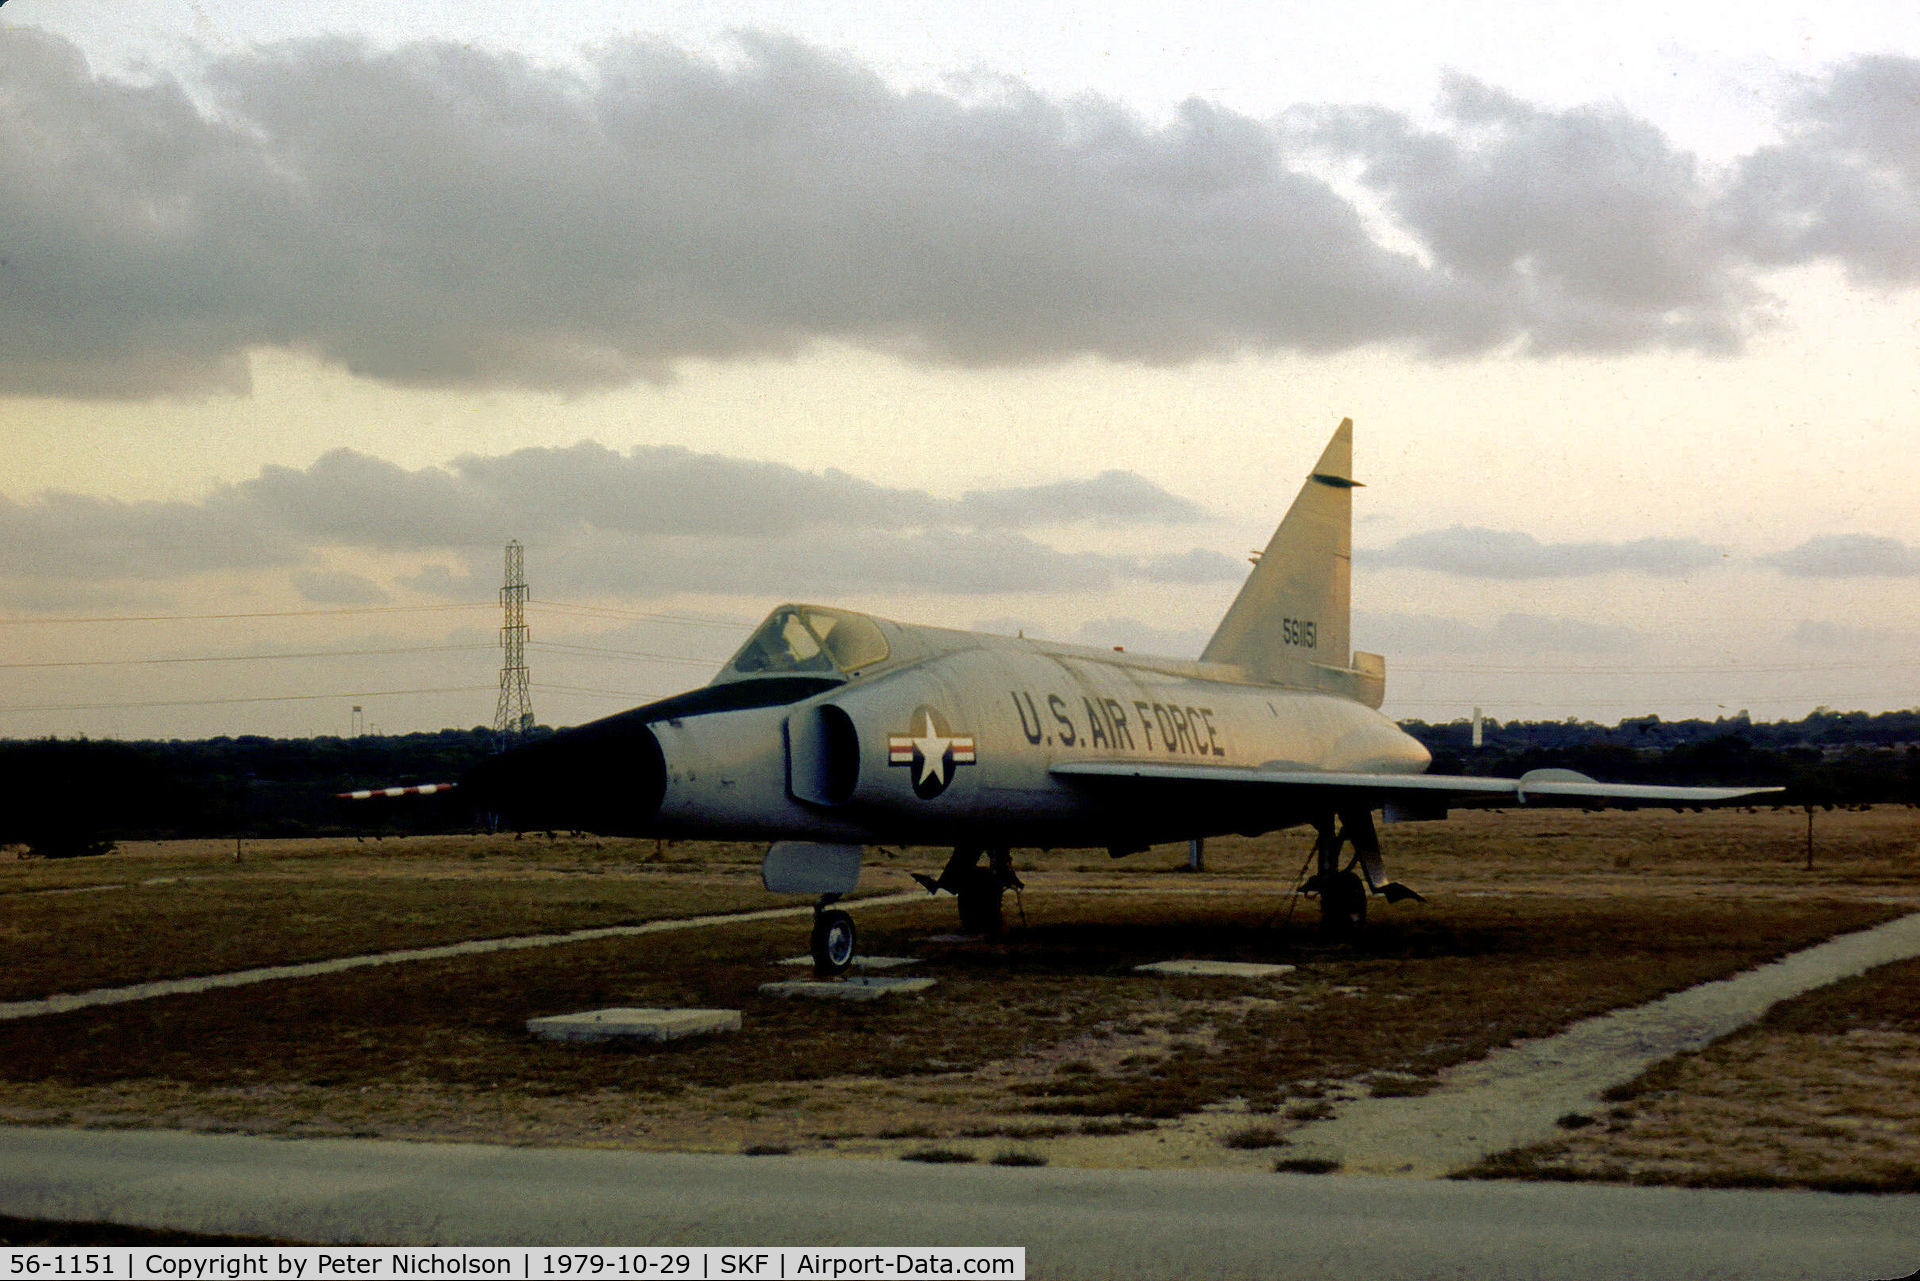 56-1151, 1956 Convair F-102A Delta Dagger C/N Not found 56-1151, F-102A Delta Dagger as an instructional trainer for flight-line security at Lackland AFB in October 1979.